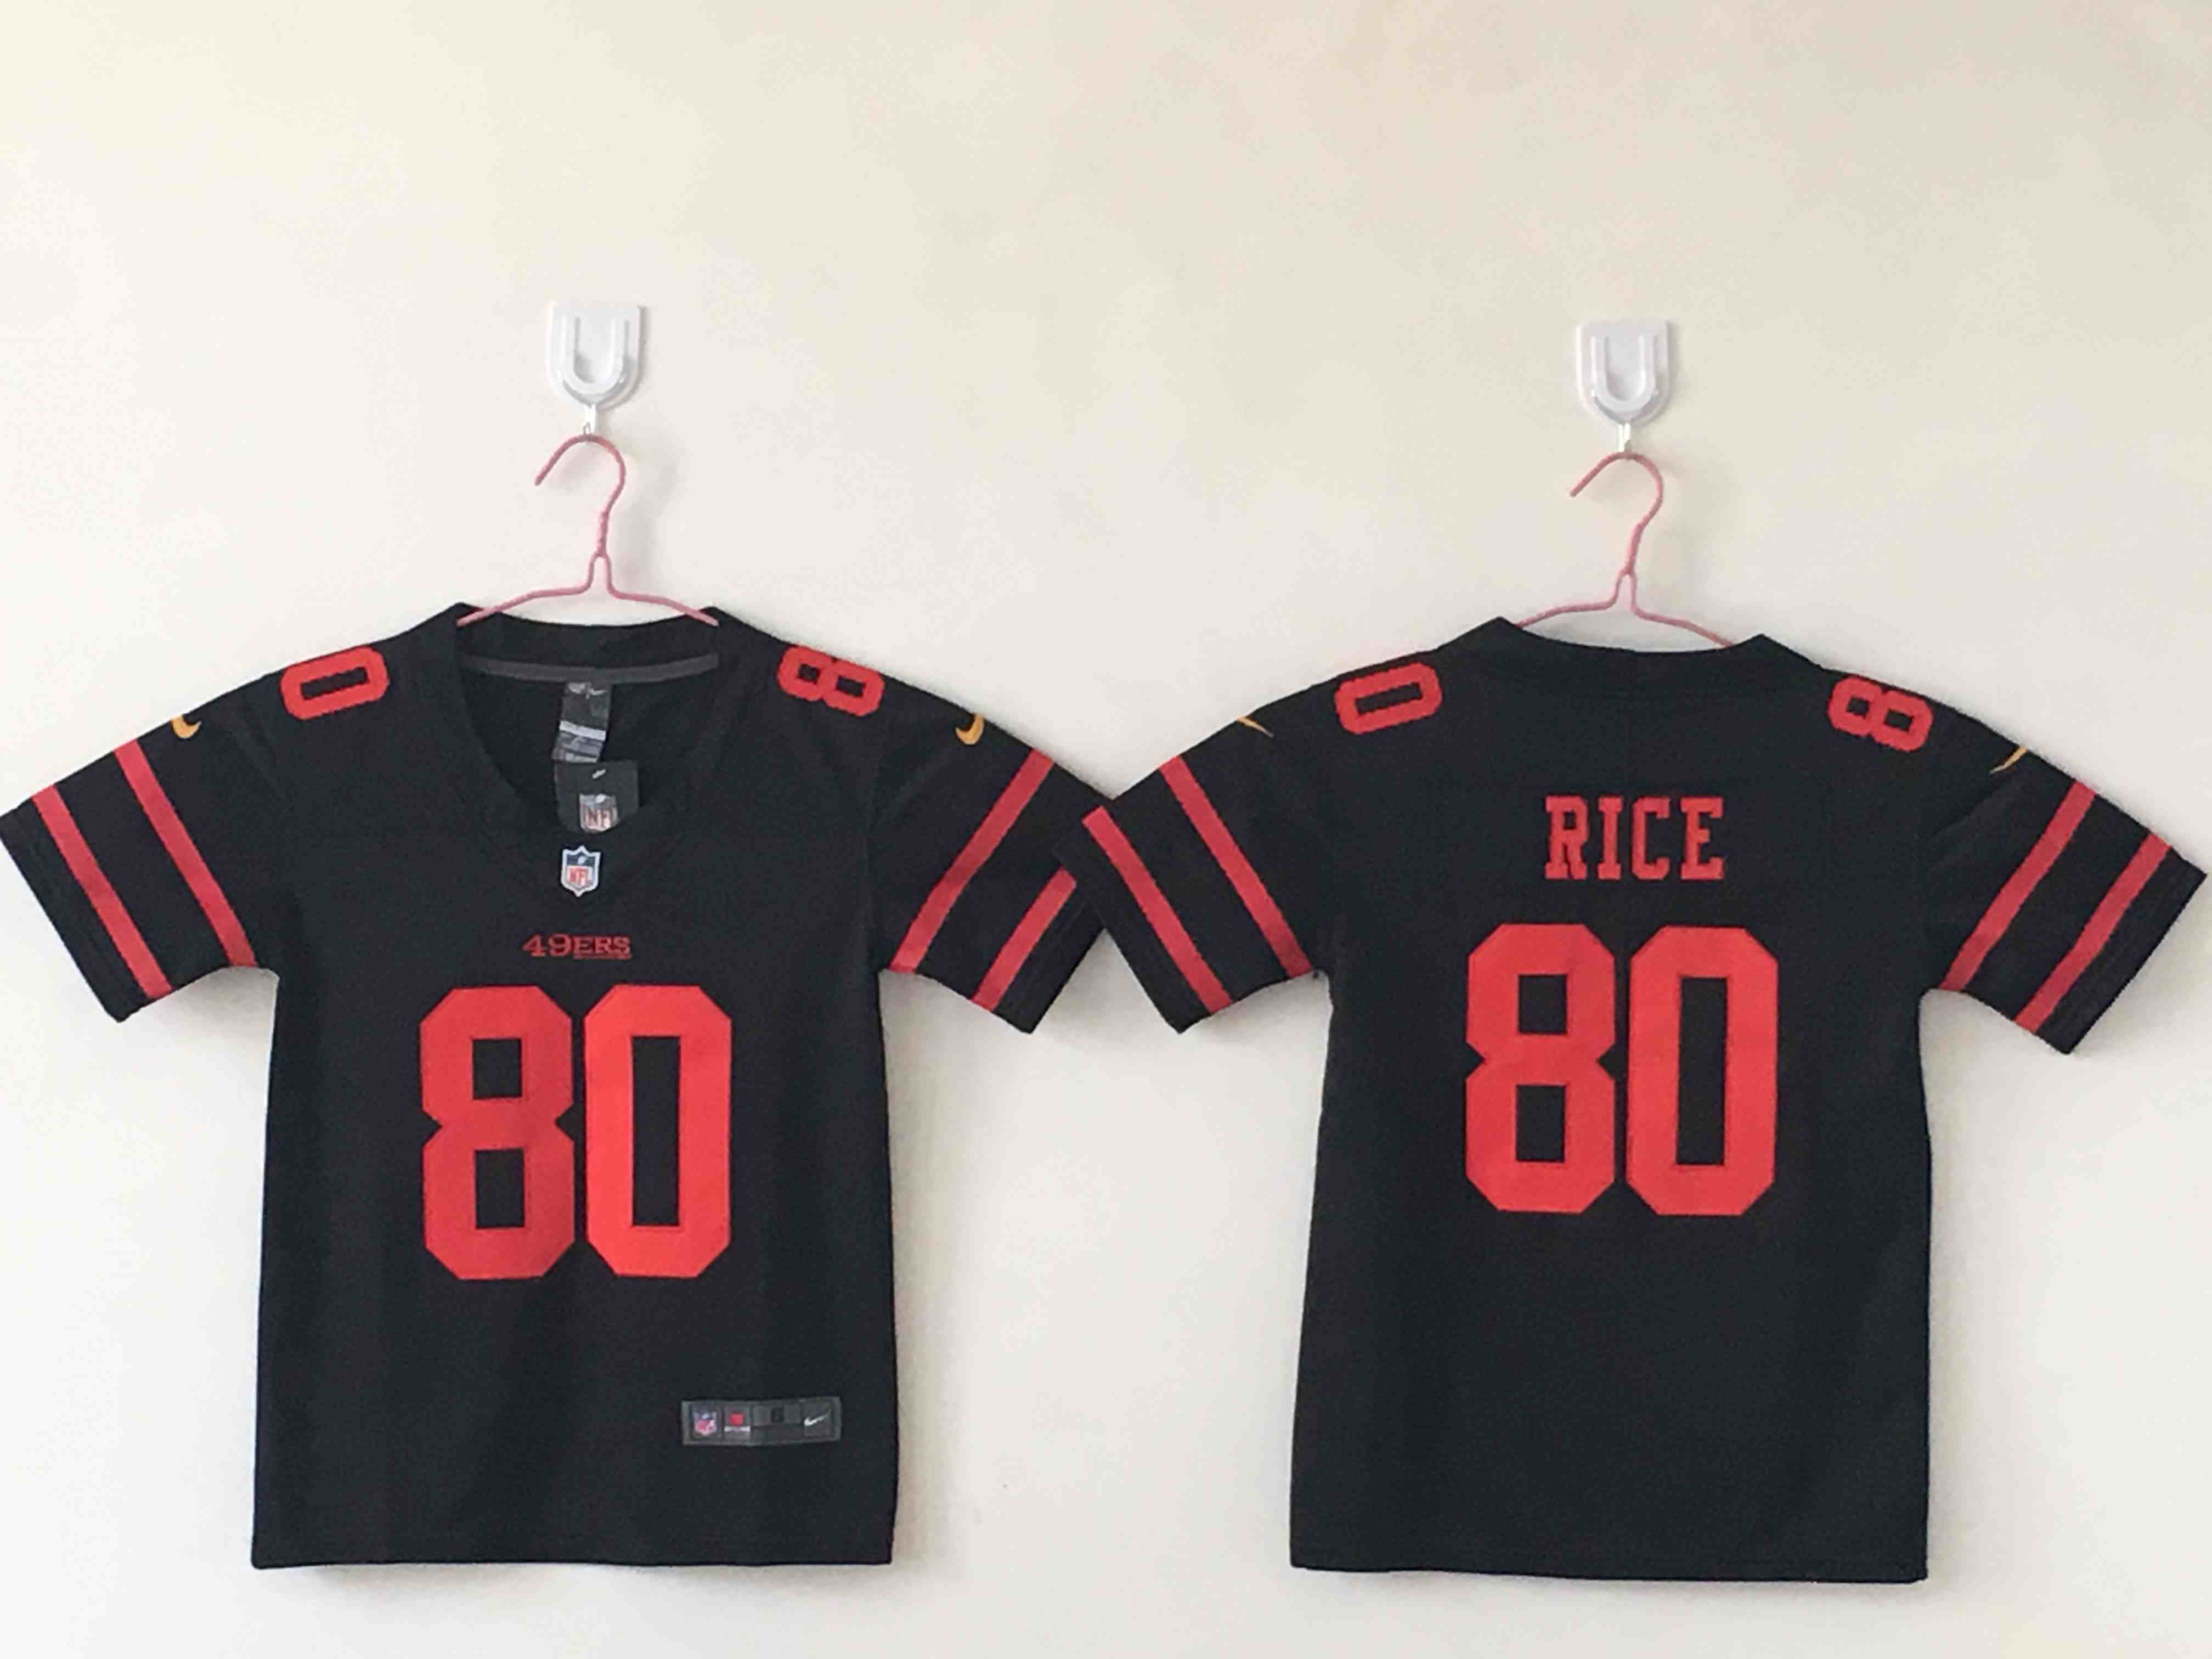 Youth NFL San Francisco 49ers #80 Jerry Rice Black Vapor Untouchable Limited Stitched Jersey